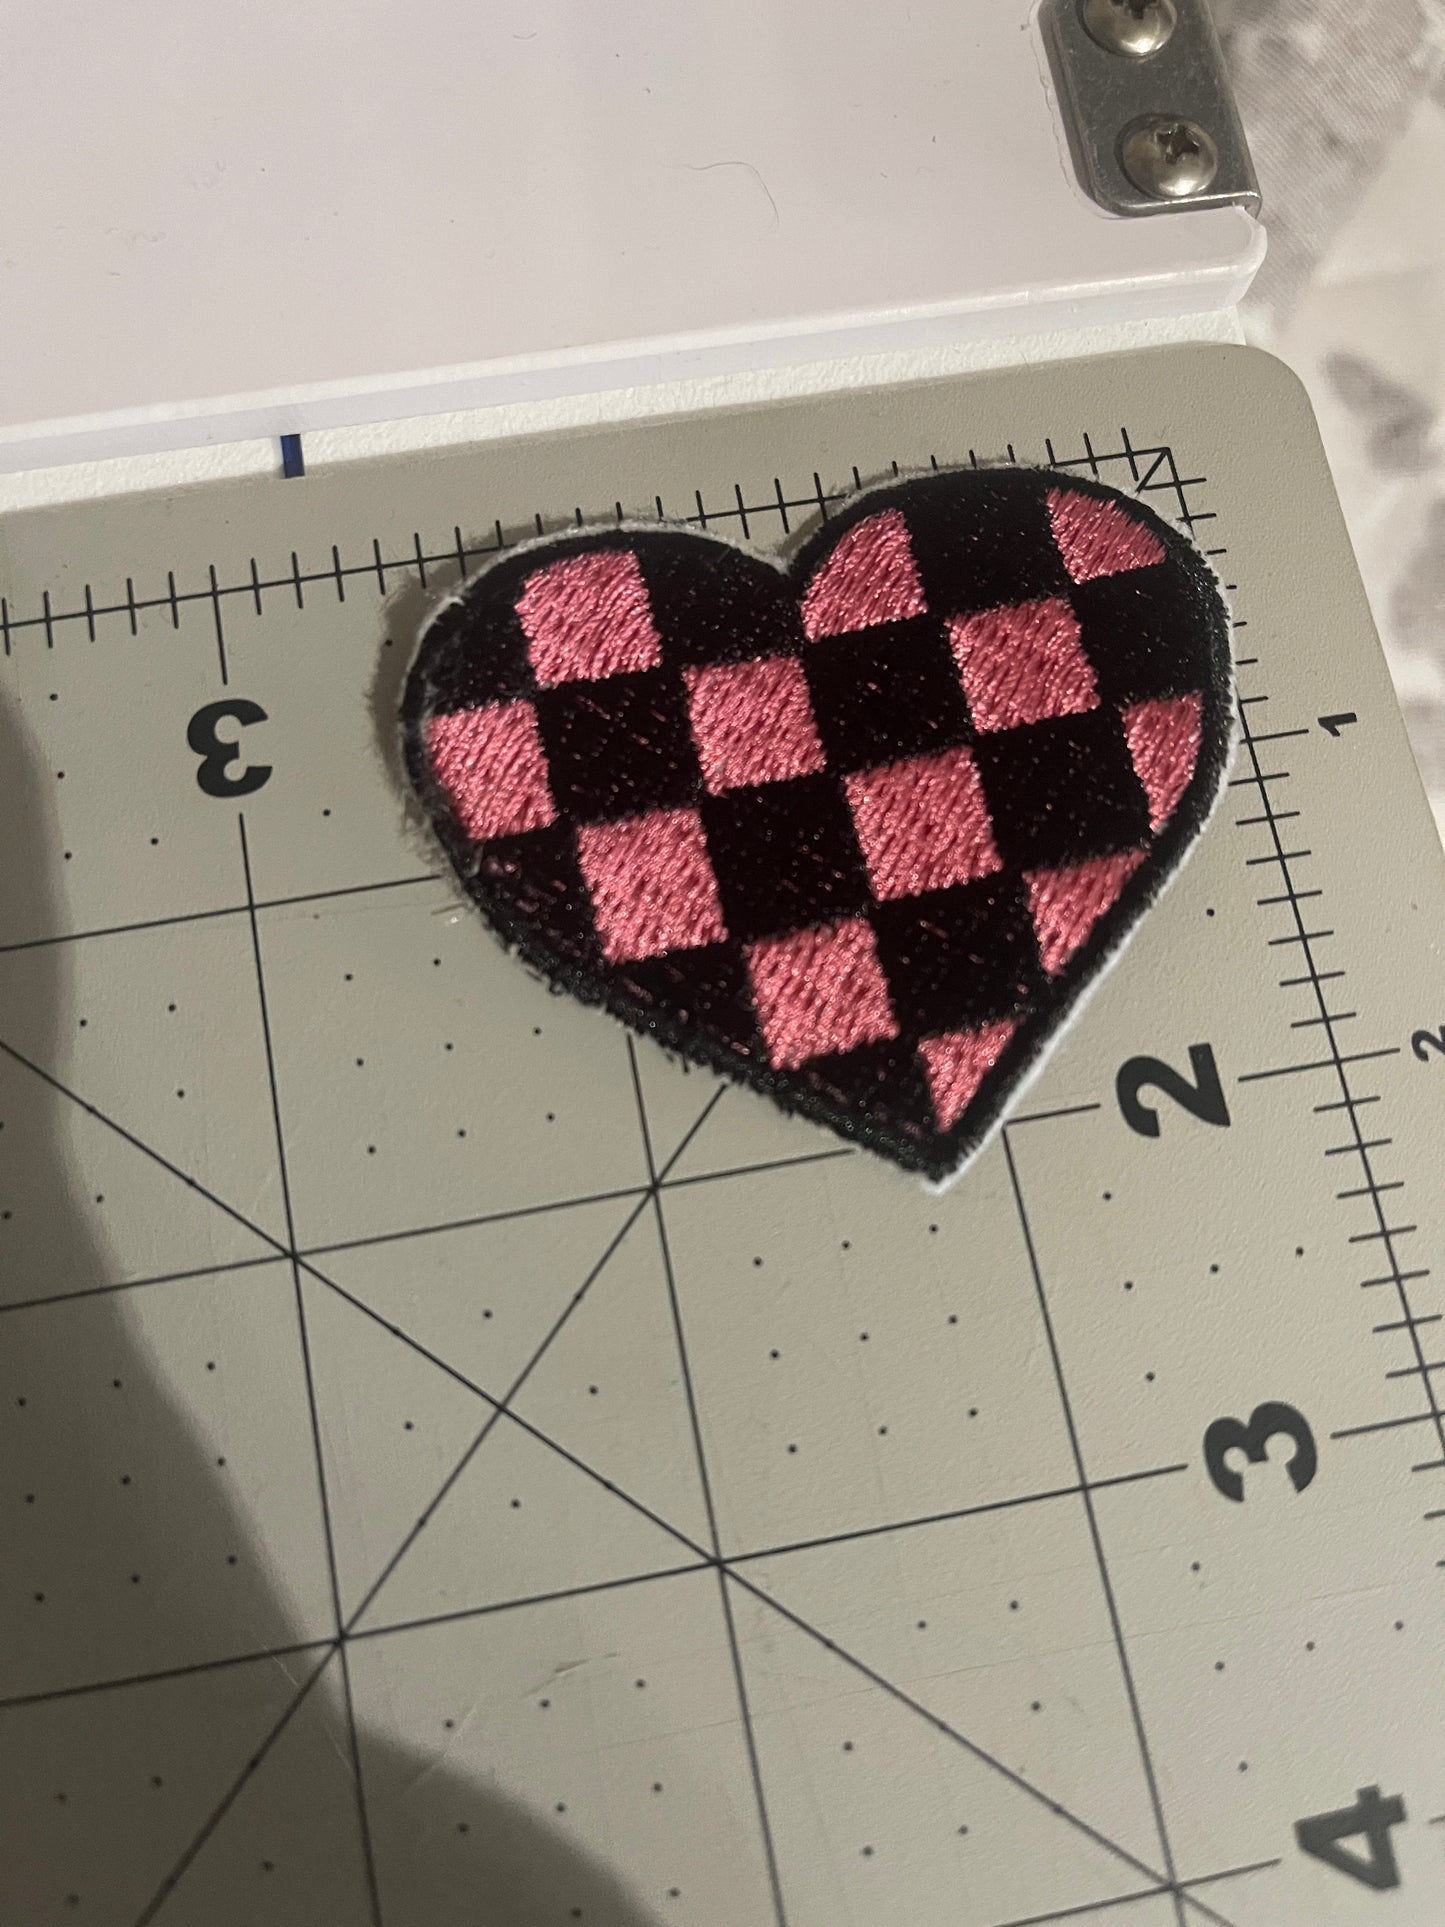 Checkered heart Iron on embroidered patch